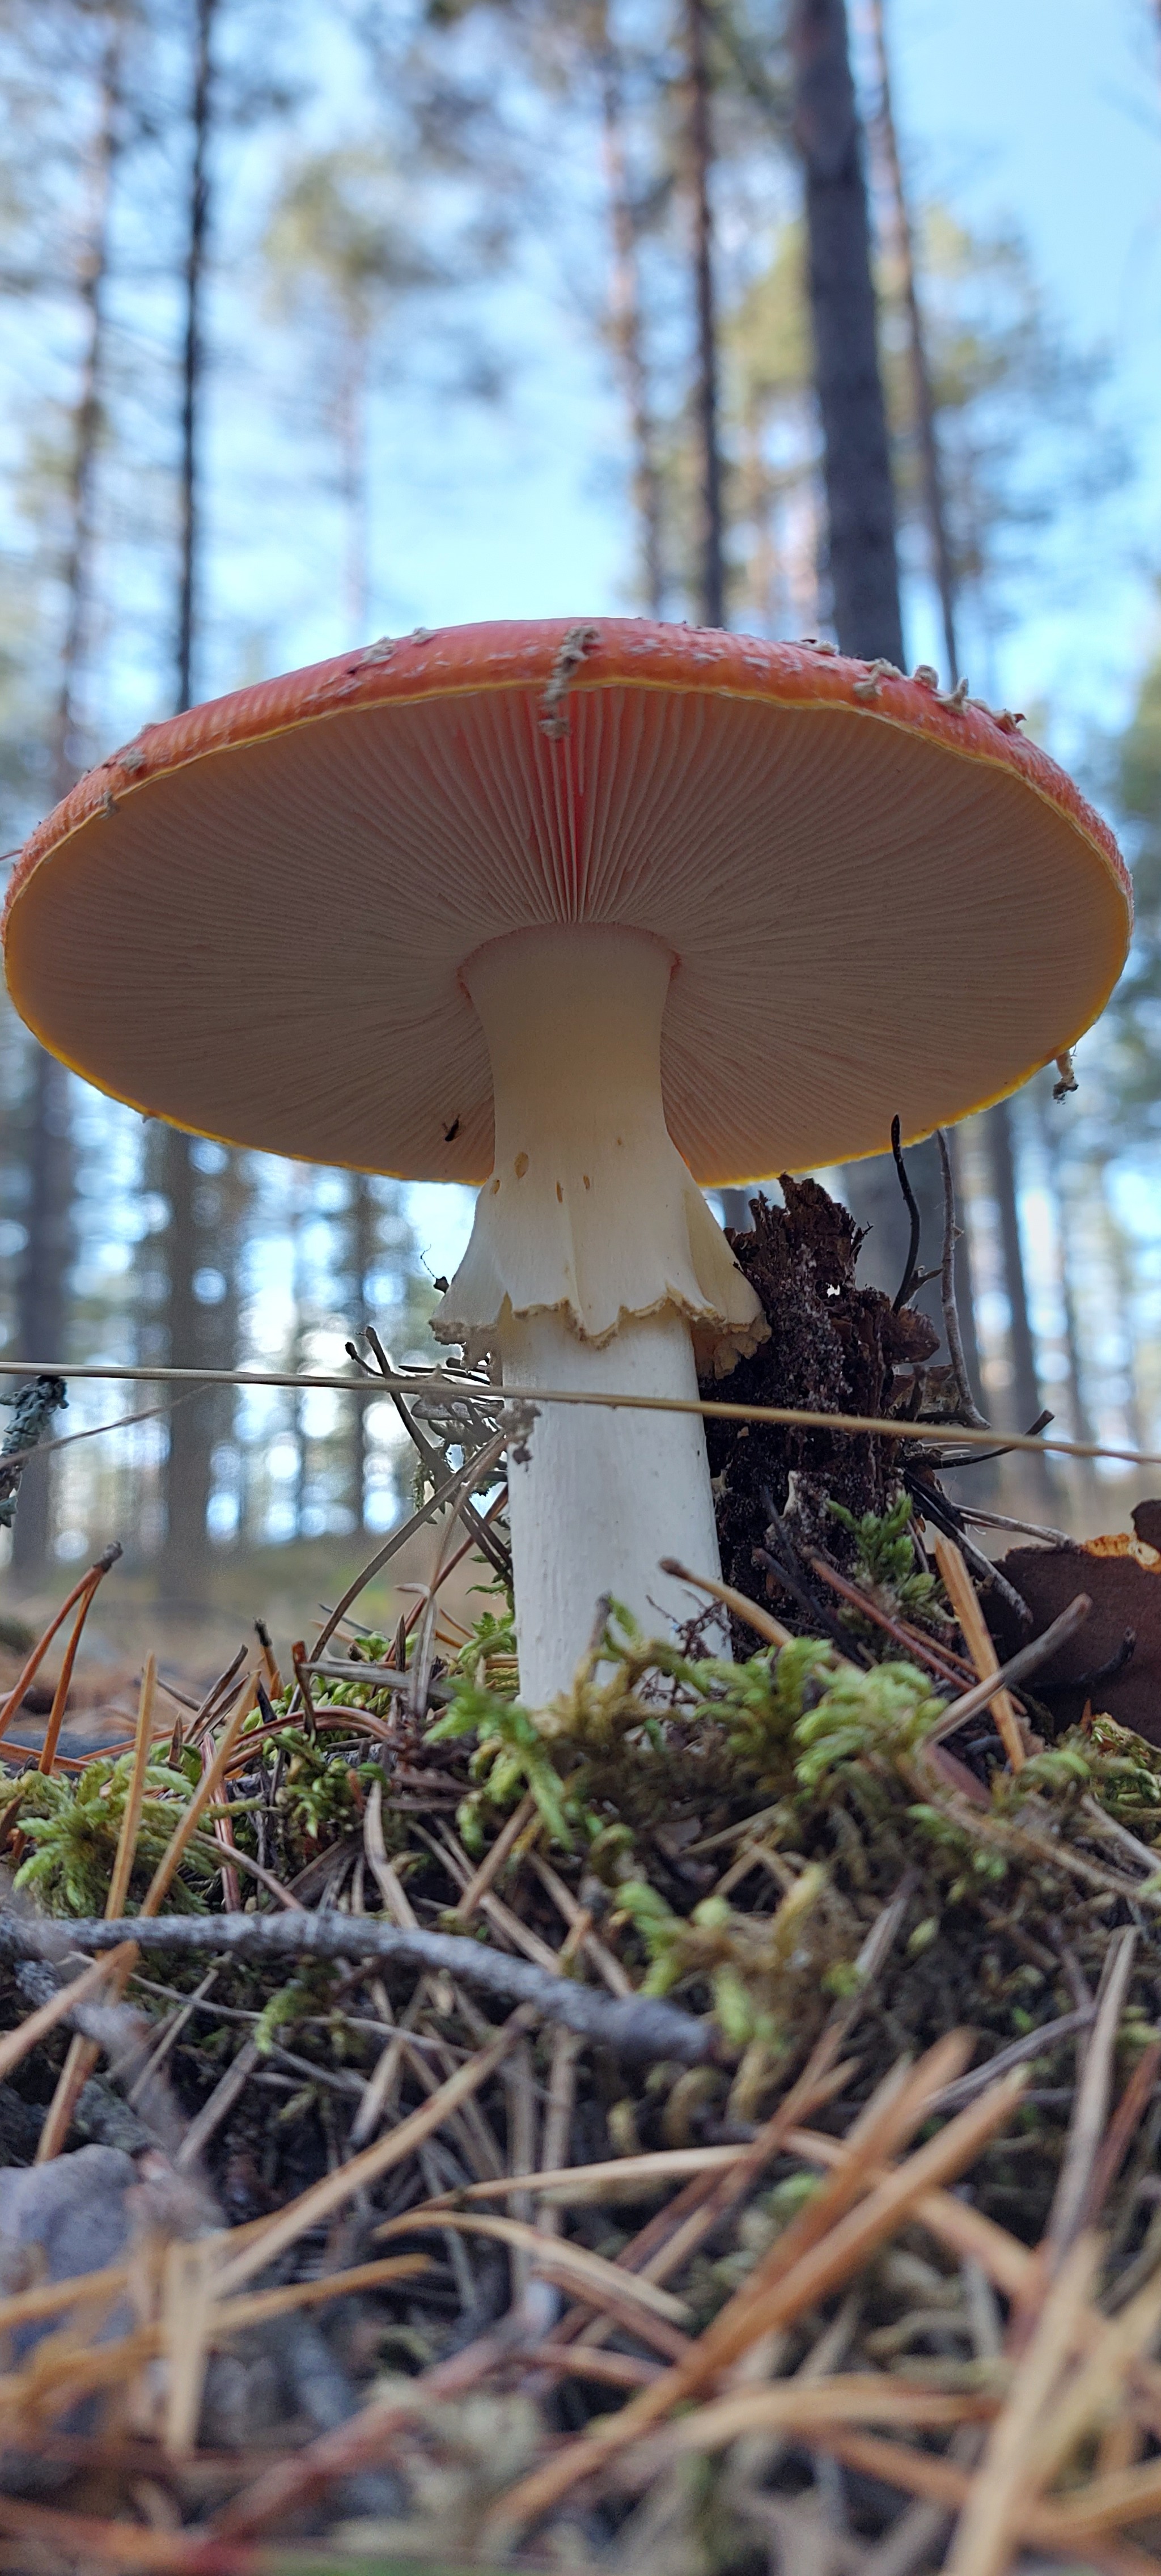 skirt - My, The photo, Mobile photography, Fly agaric, Forest, Mushrooms